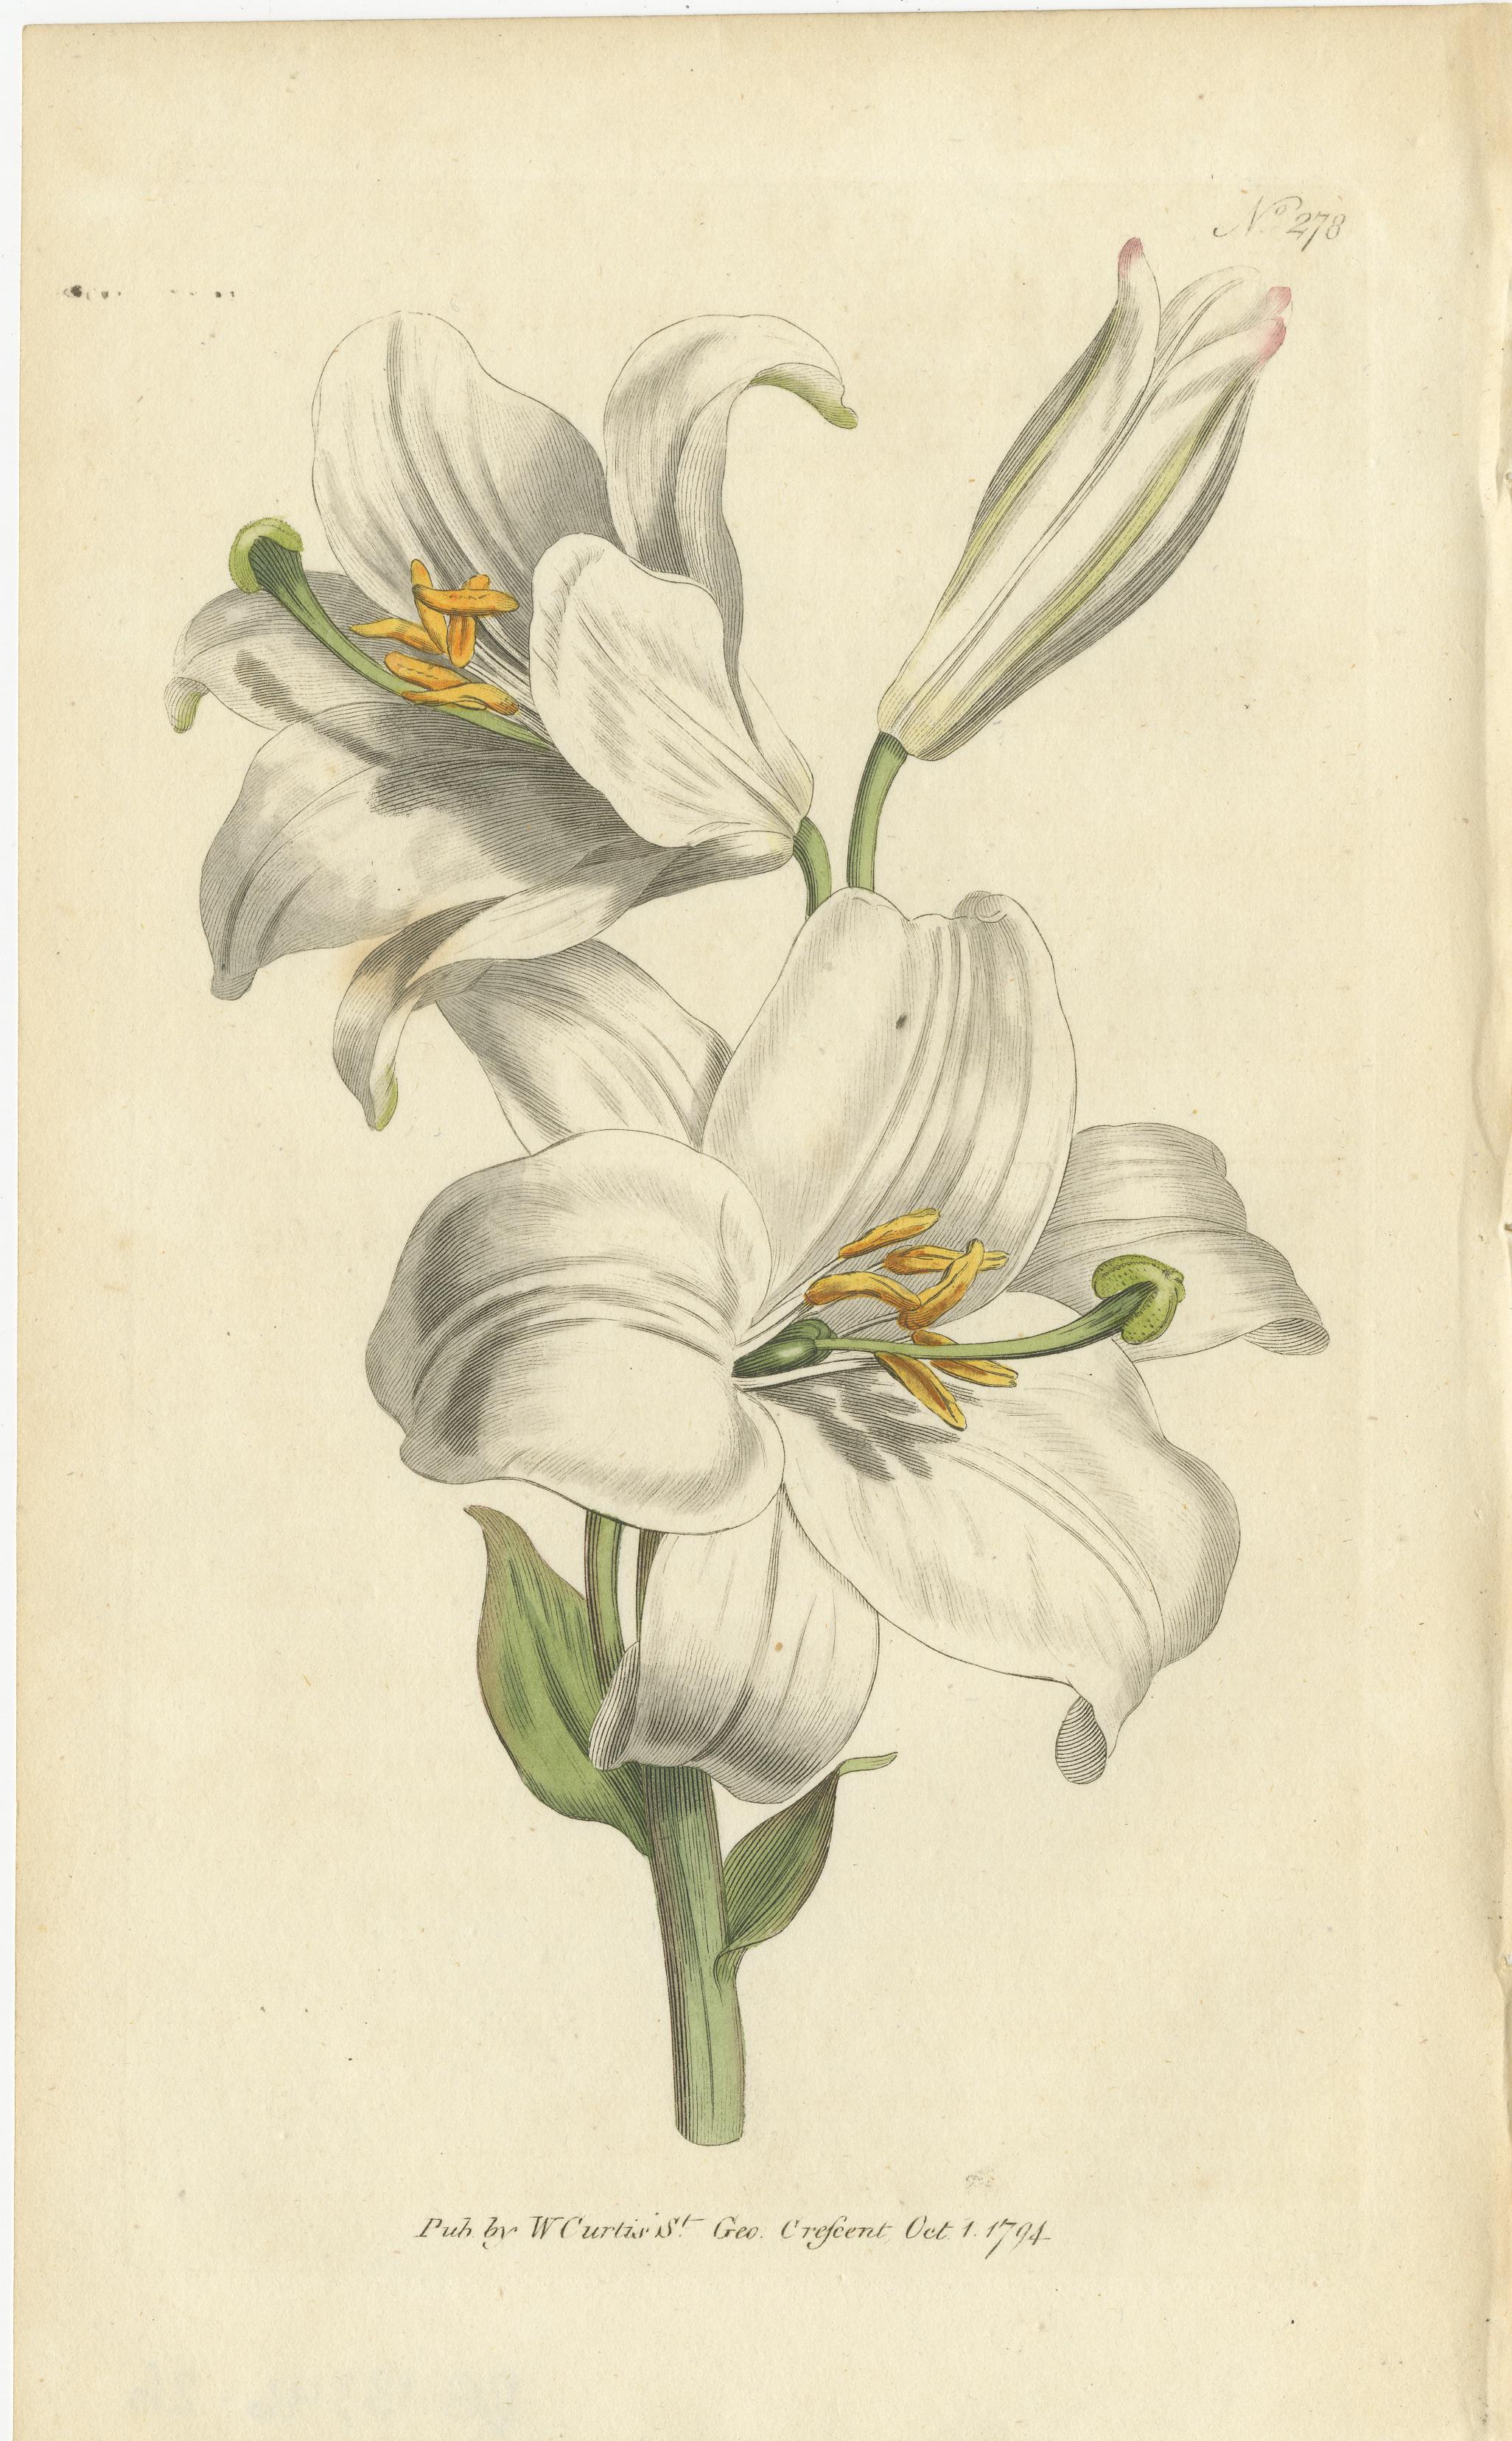 Antique botany print of the white lily. This print originates from 'The Botanical Magazine; or Flower-Garden Displayed (..)' by William Curtis. Published 1794. 

The Botanical Magazine; or Flower-Garden Displayed, is an illustrated publication